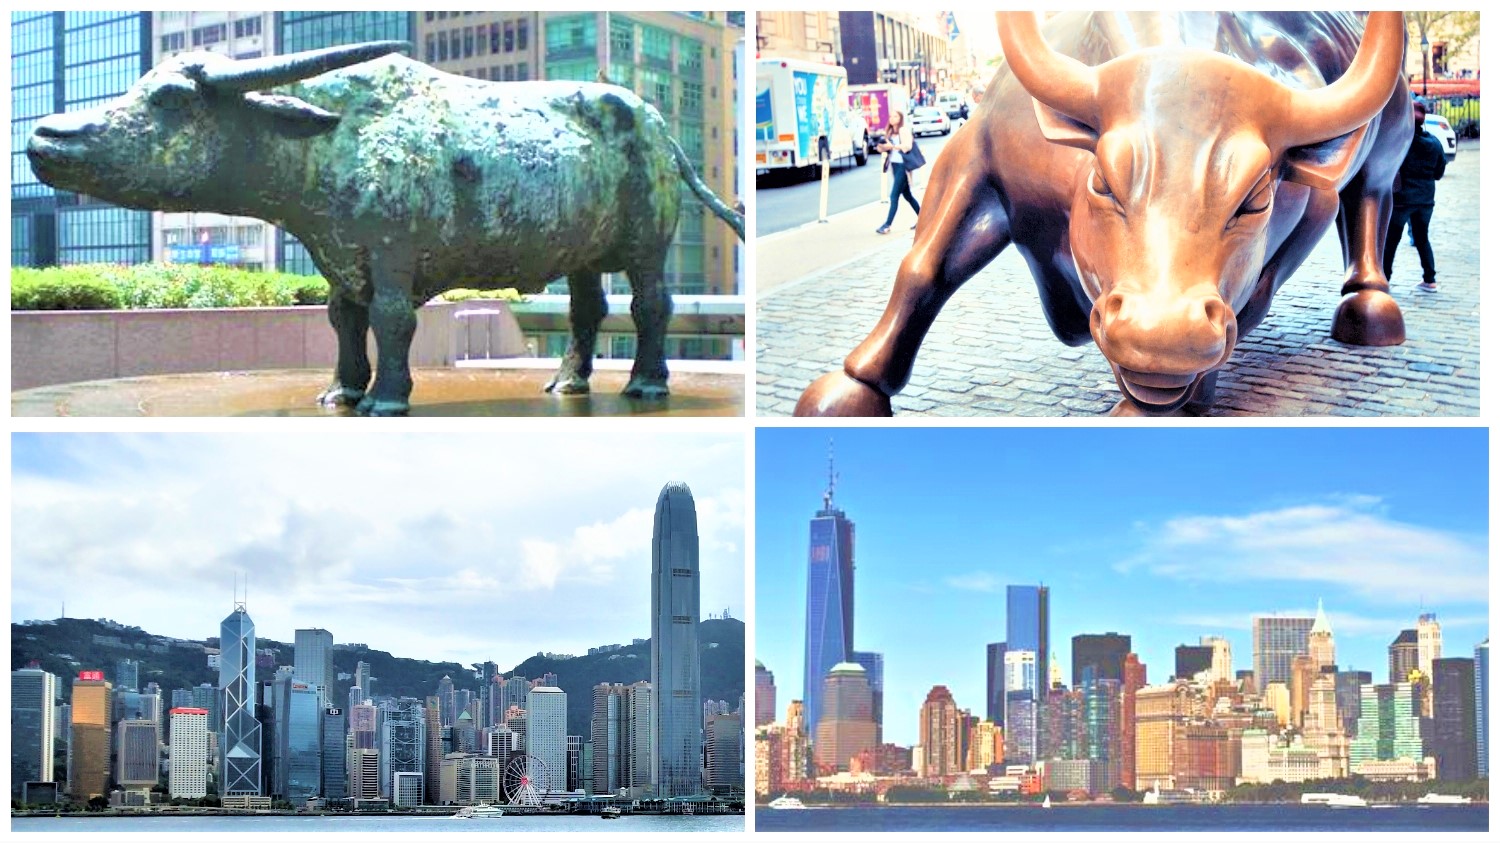 Compare Hong Kone's buffalo statues and New York's Charging Bull statue